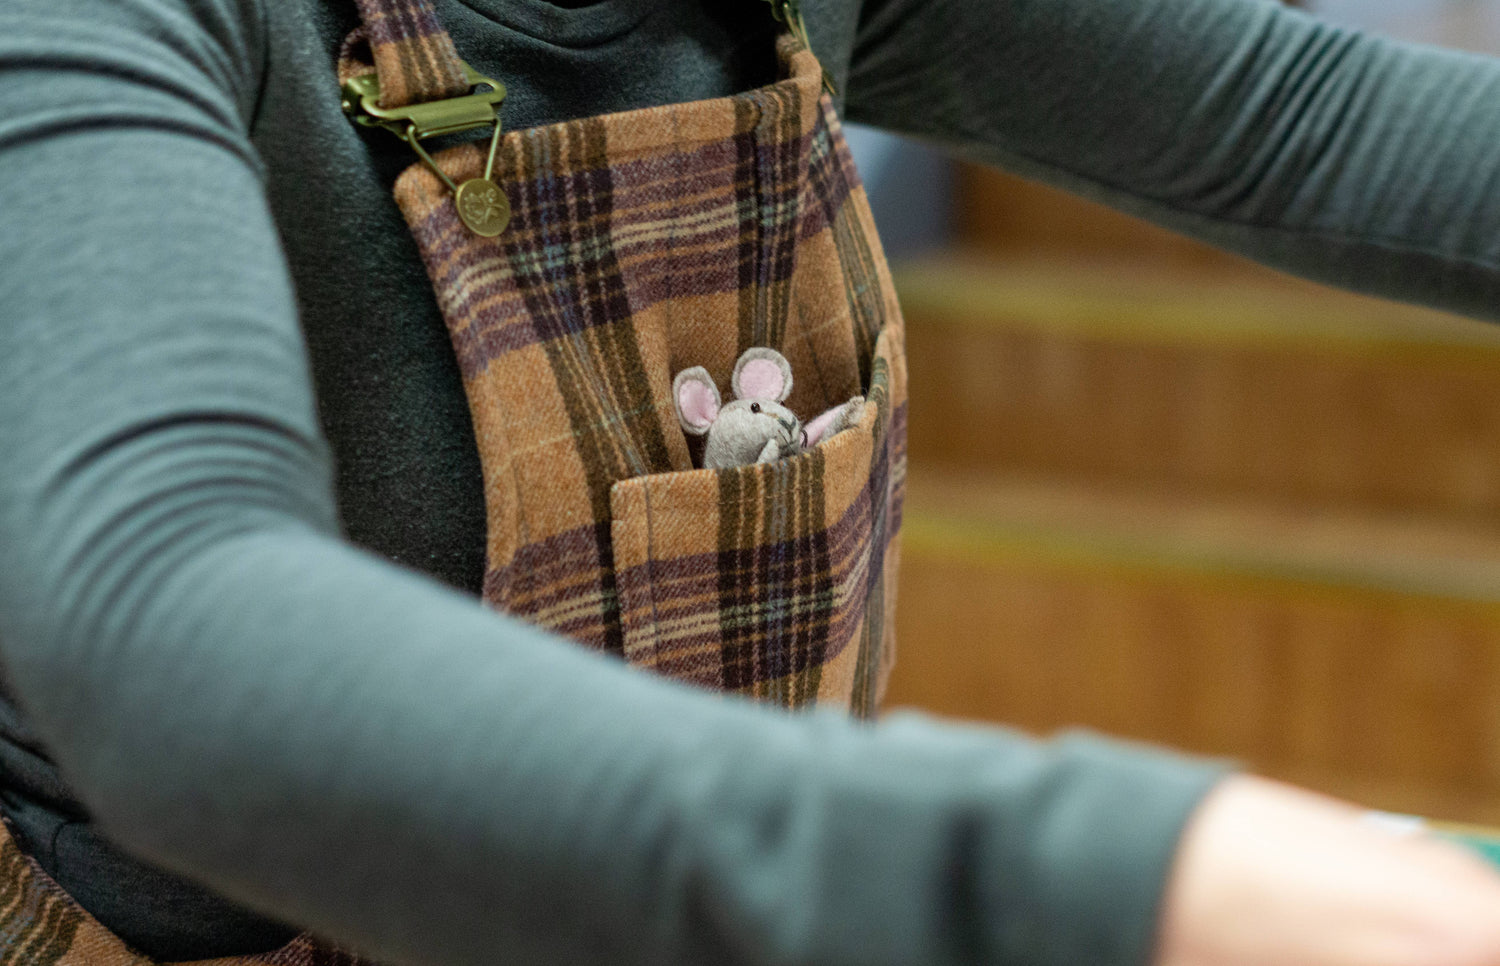 A picture of Julius the mouse in a pocket.